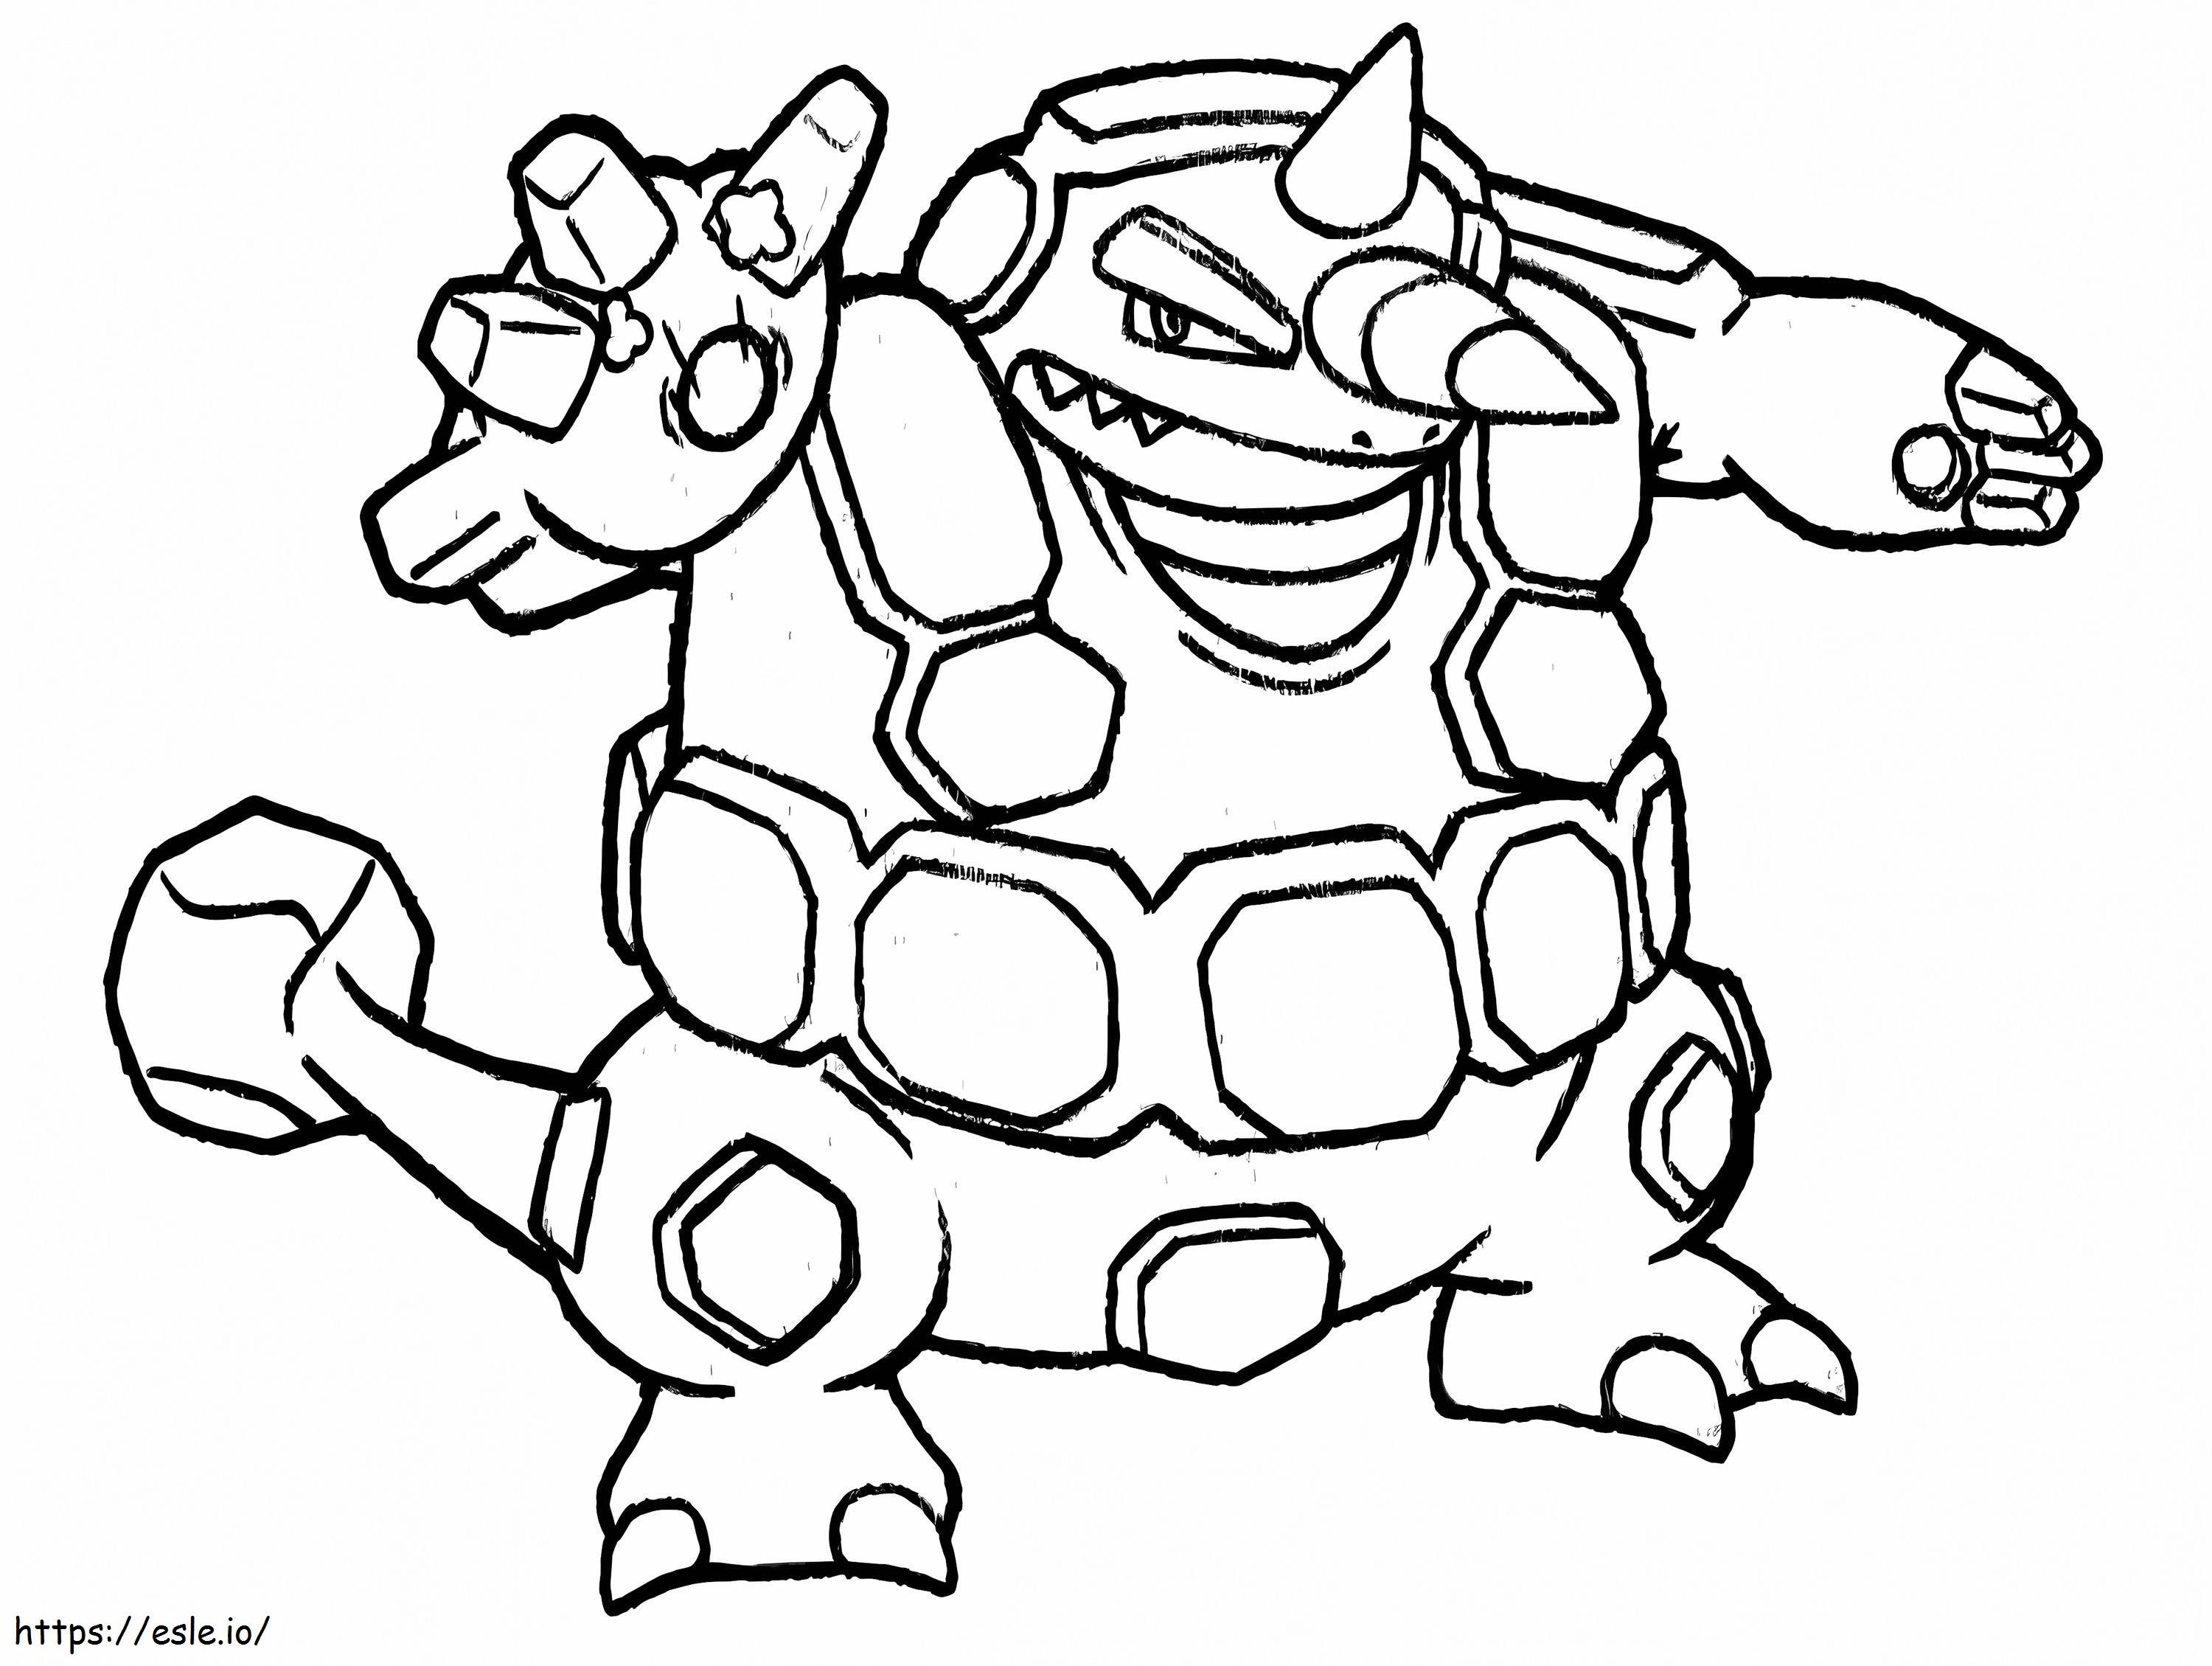 Rhyperior Pokemon 2 coloring page